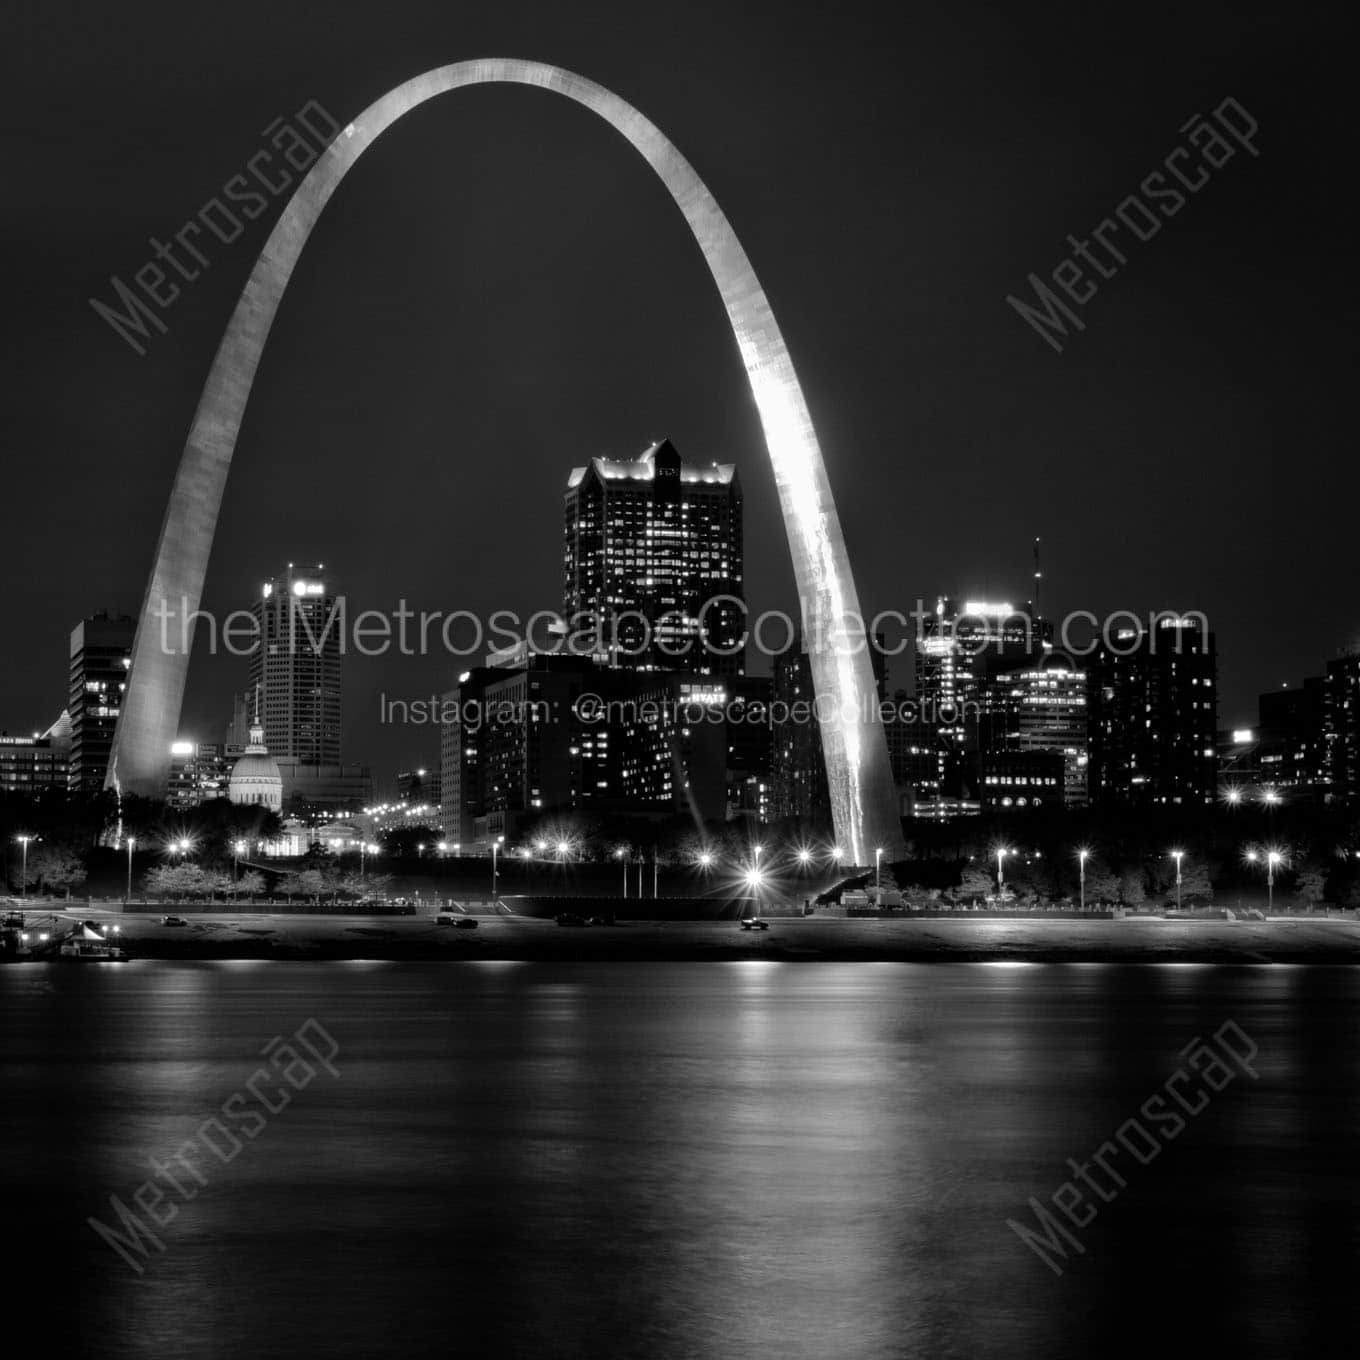 st louis arch at night Black & White Wall Art